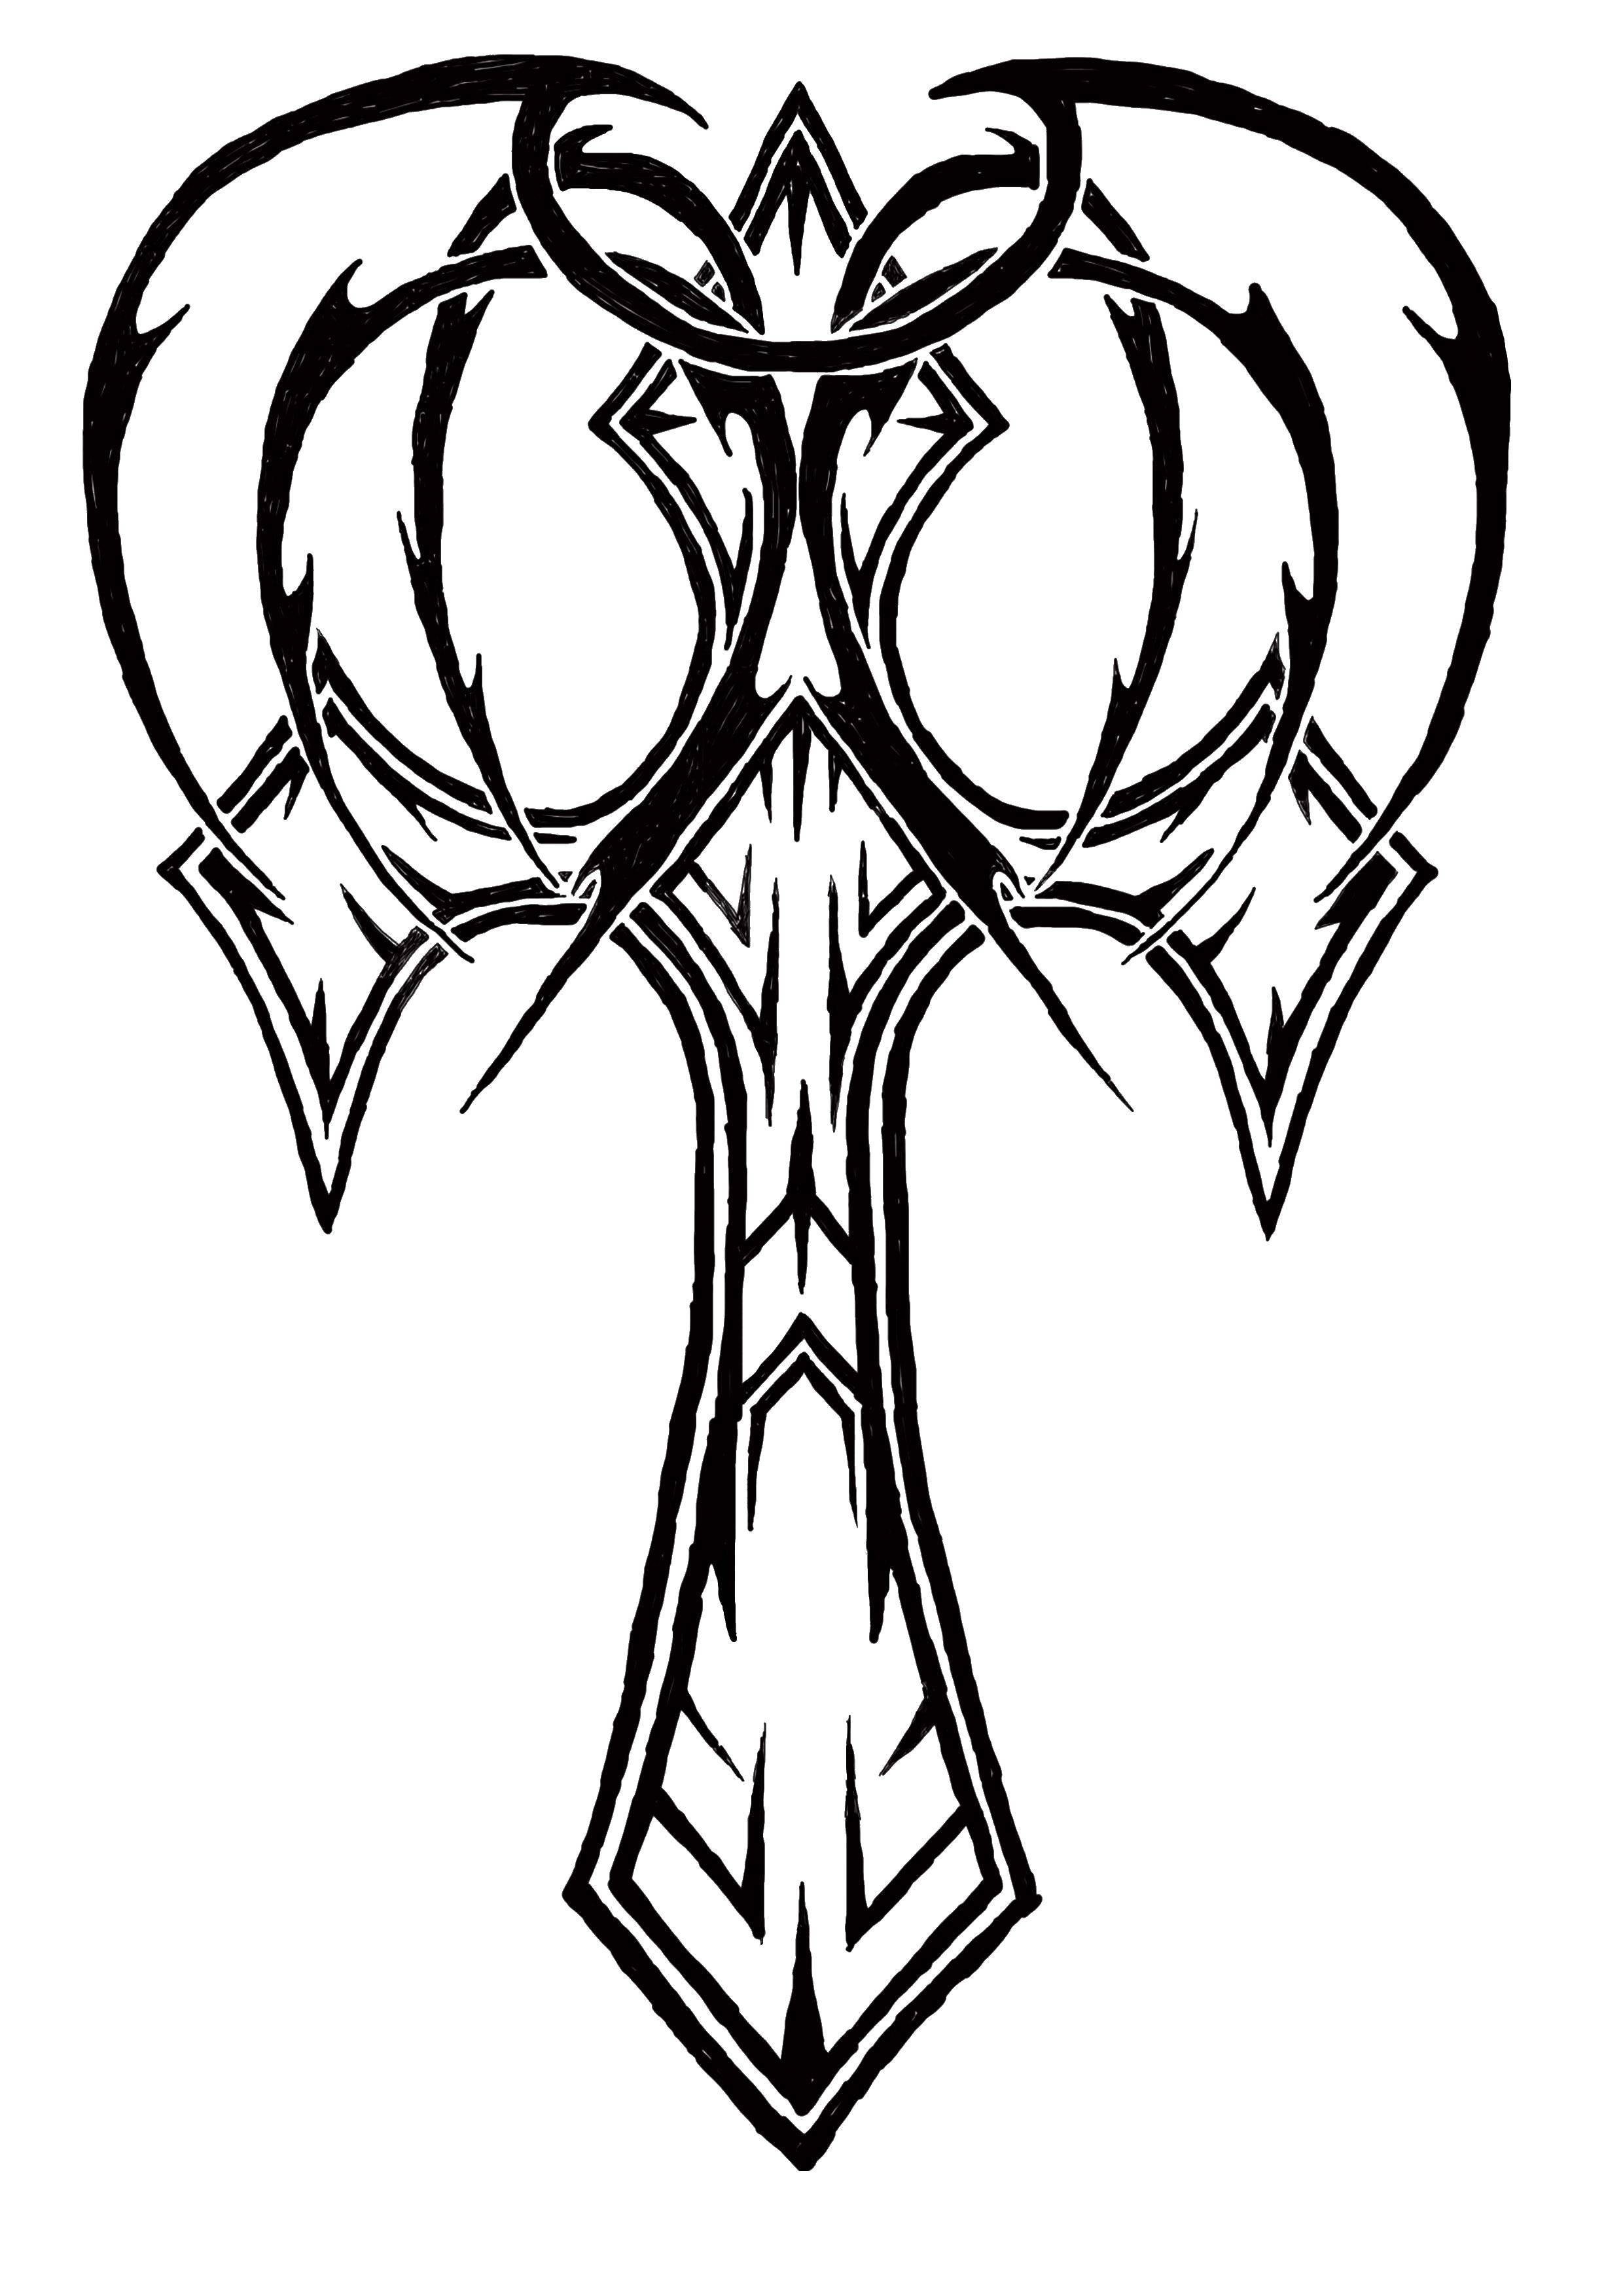 Coloring Unusual cross. Category coloring pages cross. Tags:  Cross.